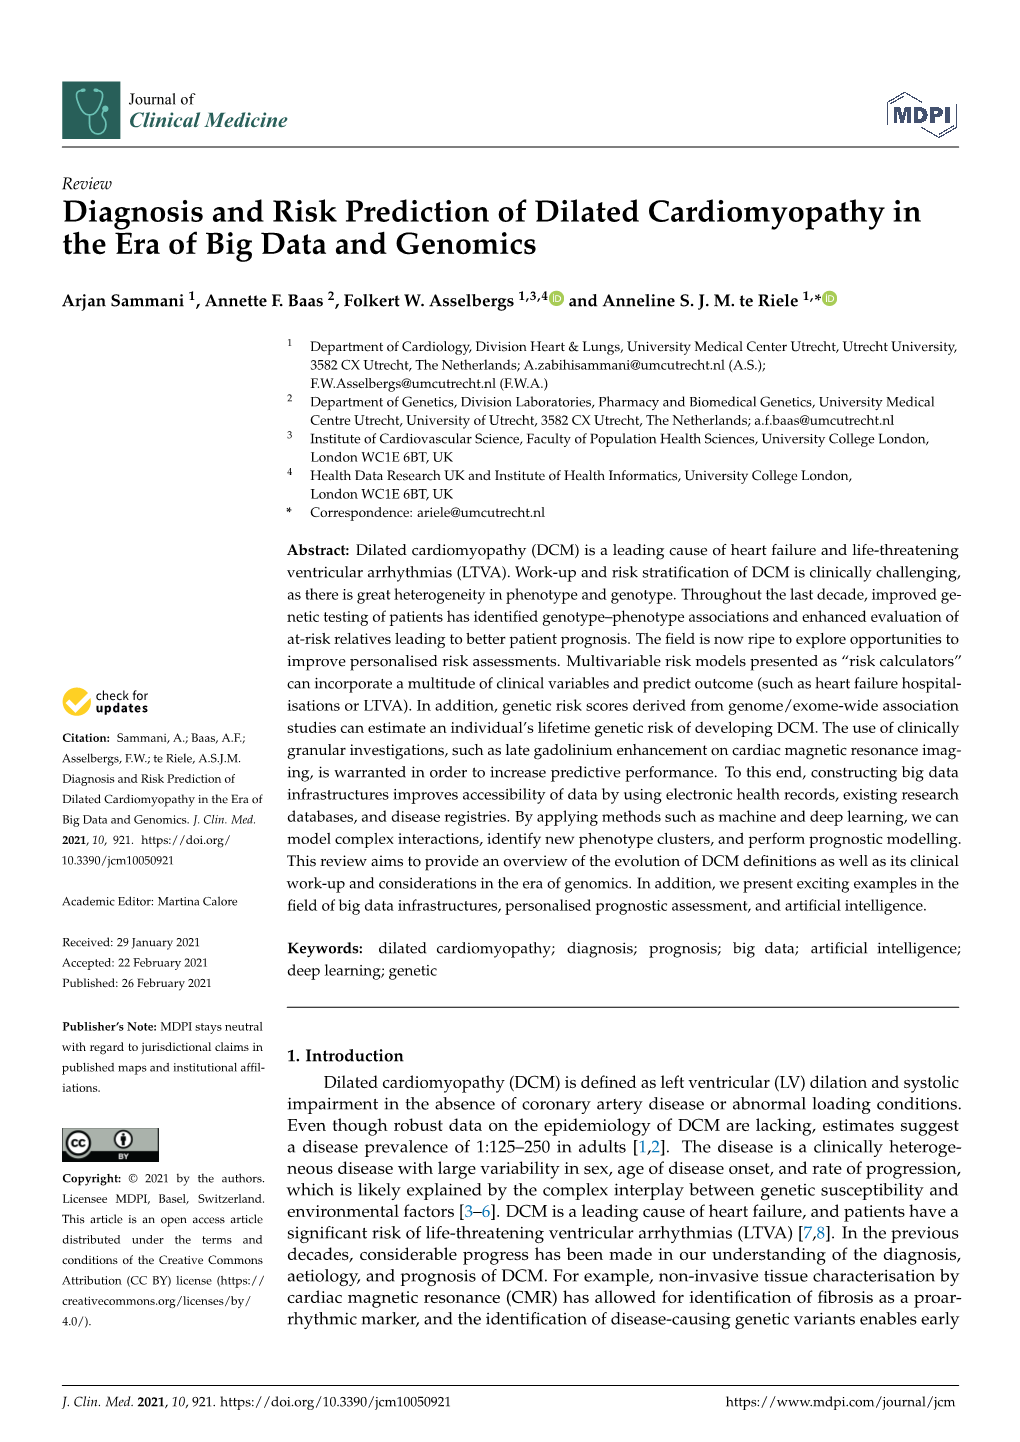 Diagnosis and Risk Prediction of Dilated Cardiomyopathy in the Era of Big Data and Genomics